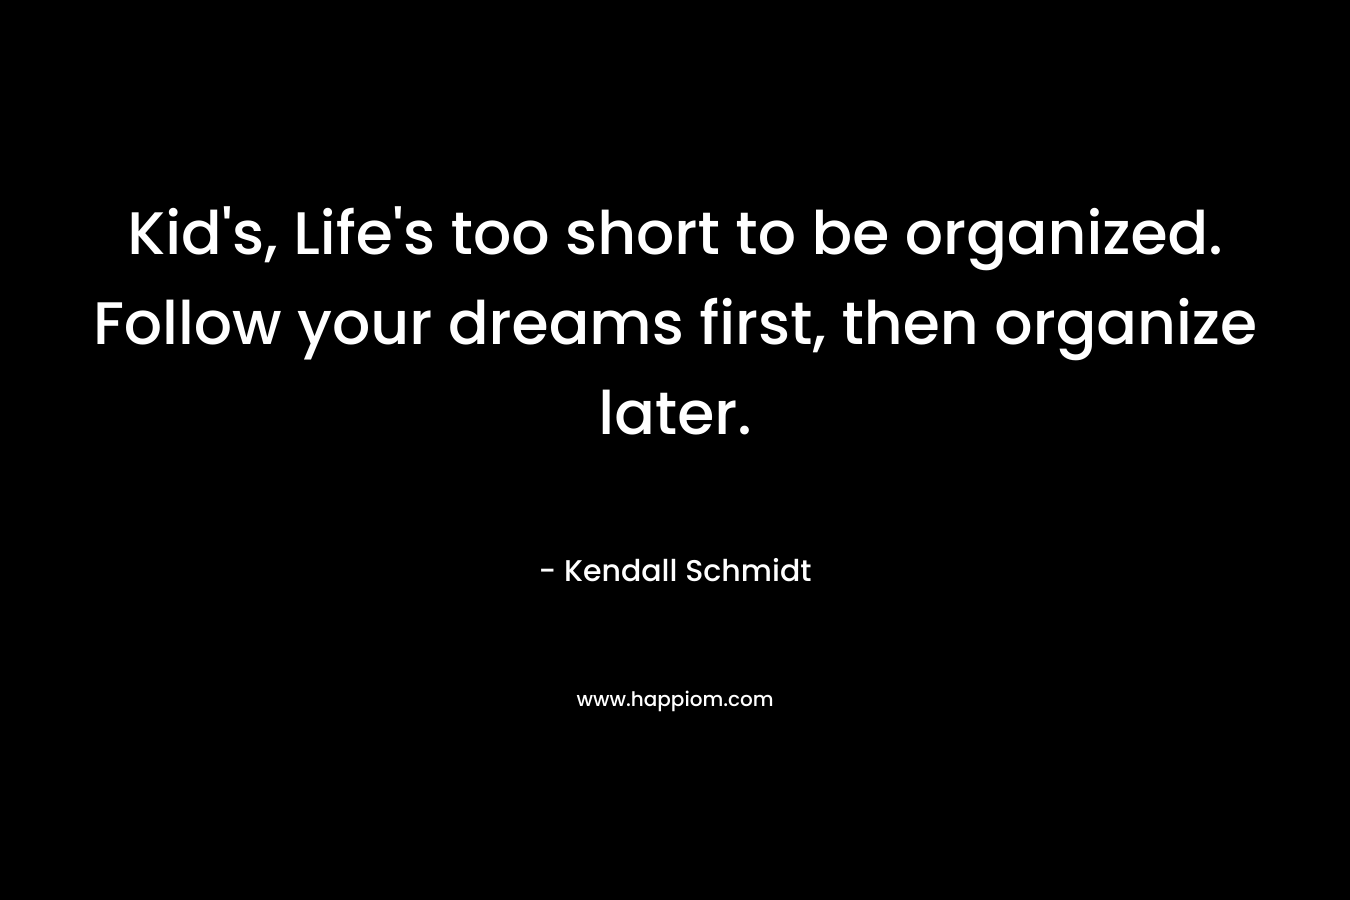 Kid’s, Life’s too short to be organized. Follow your dreams first, then organize later. – Kendall Schmidt